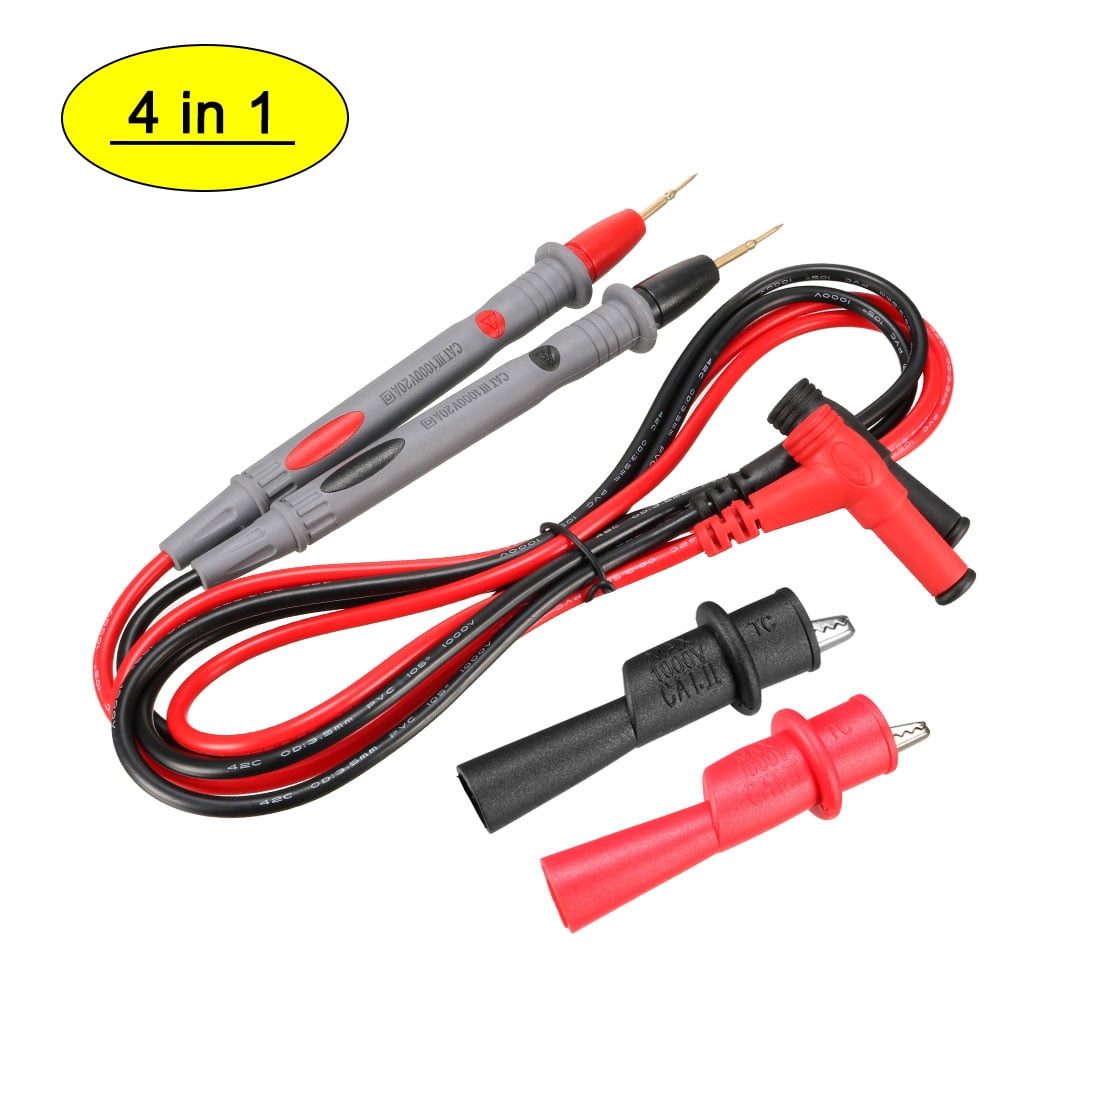 1000V 20A Probe Test Lead Clamp Cable Wire Test For Digital Multimeter Tester 